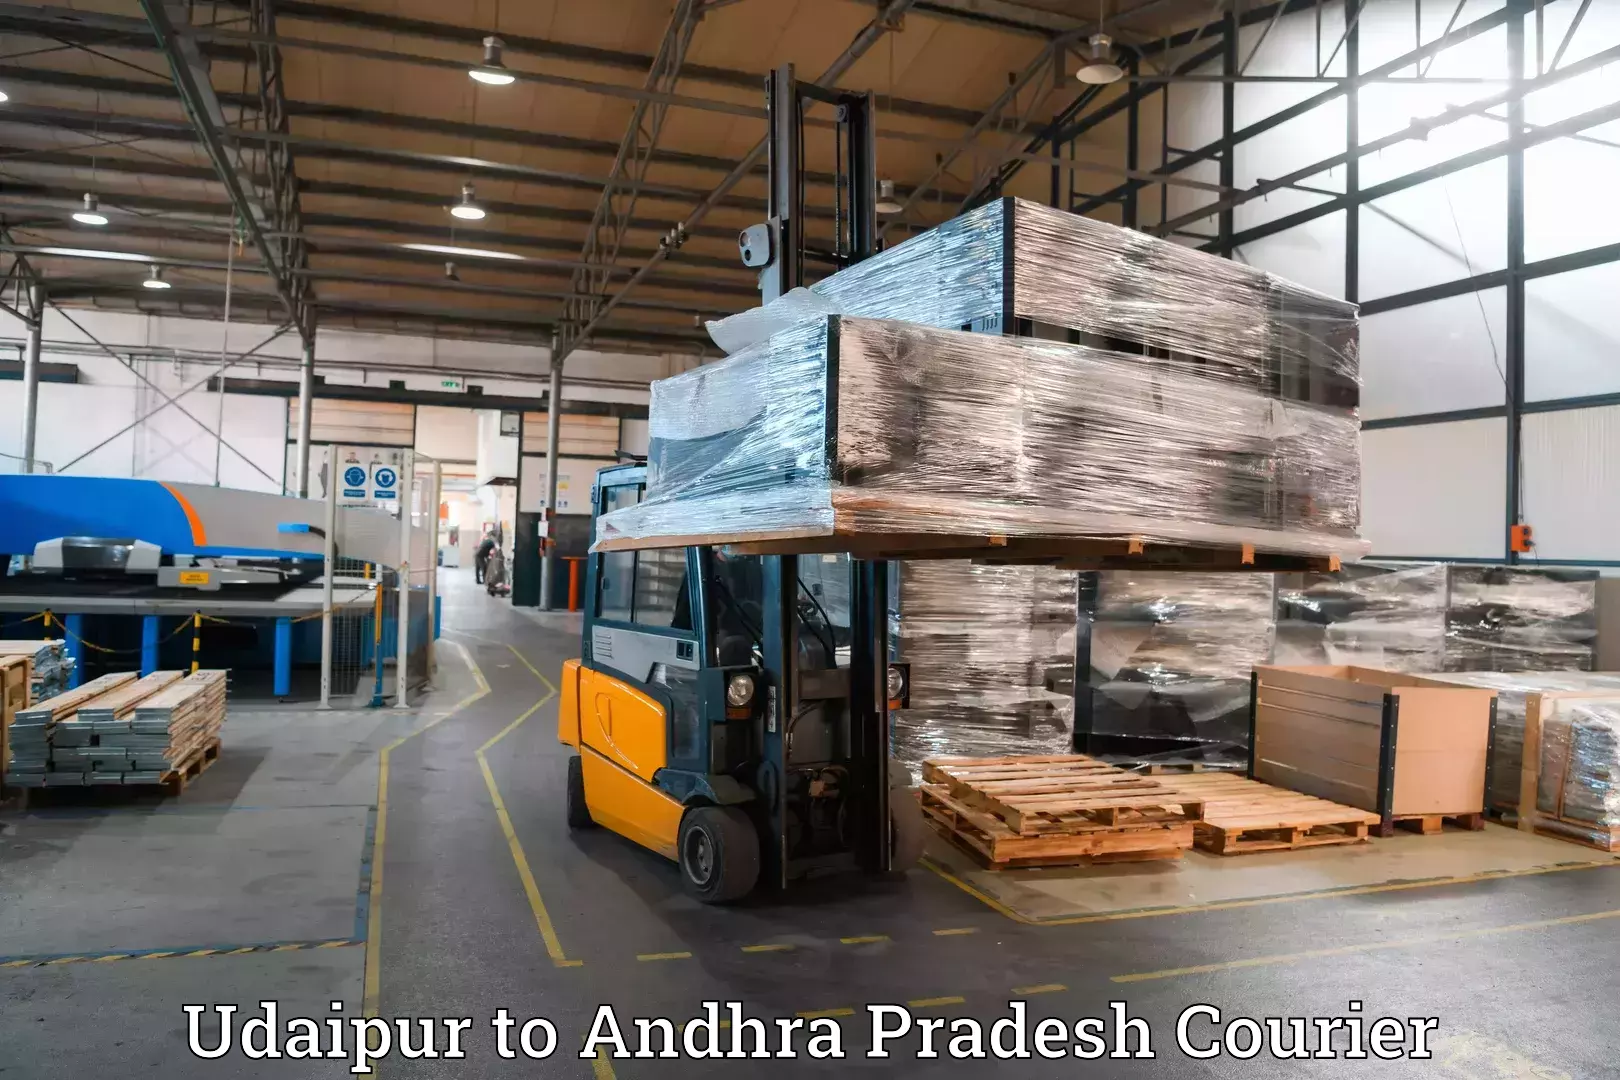 Baggage shipping schedule in Udaipur to Gopalapatnam